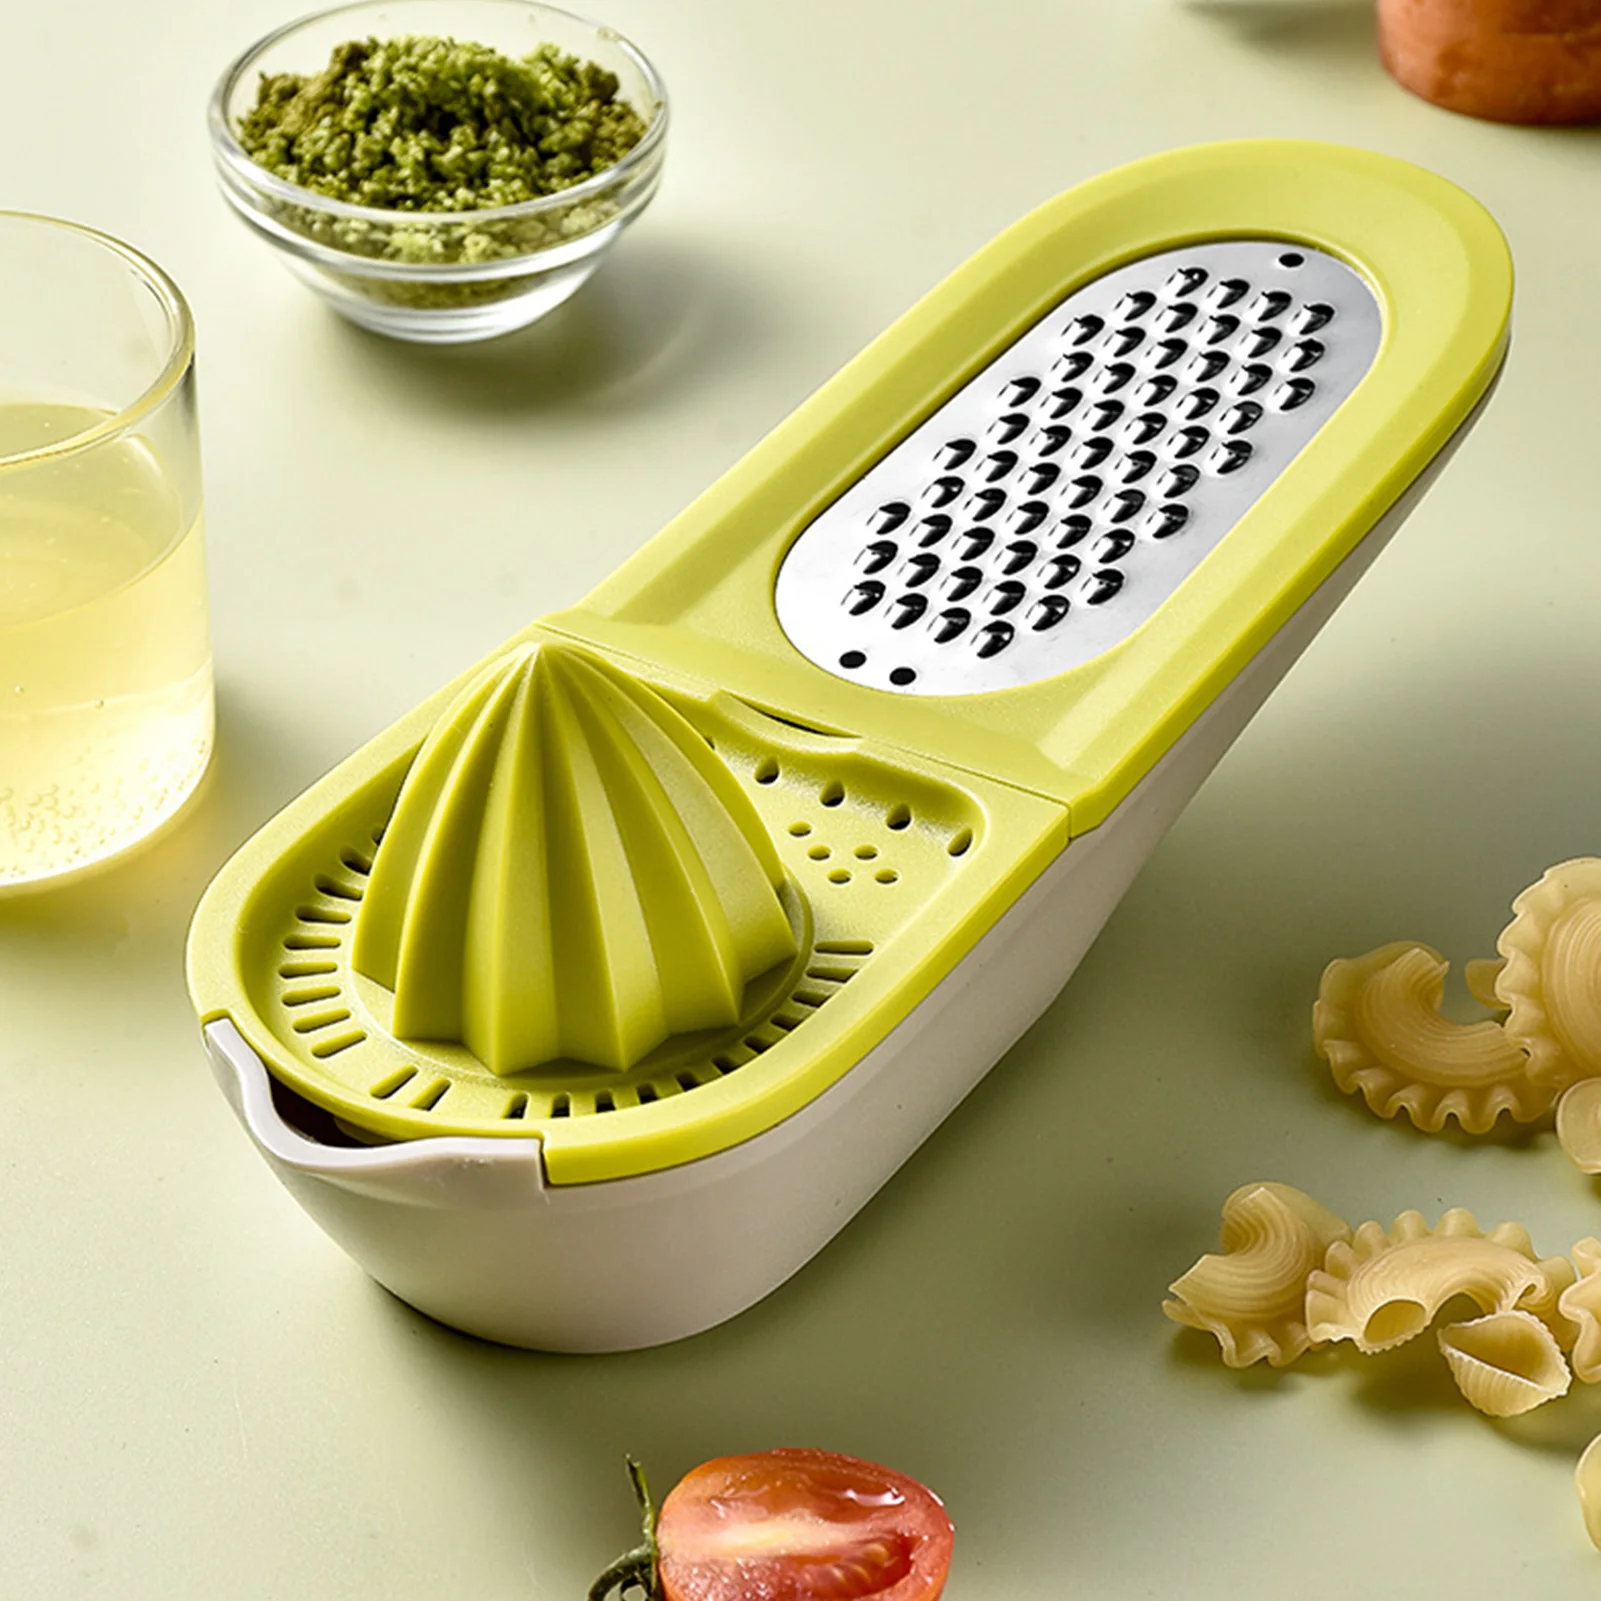 

Citrus Orange Juicer Manual Lemon Squeezer With Grater Multifunction Manual Juicer With Container Ginger Garlic Cheese Grater